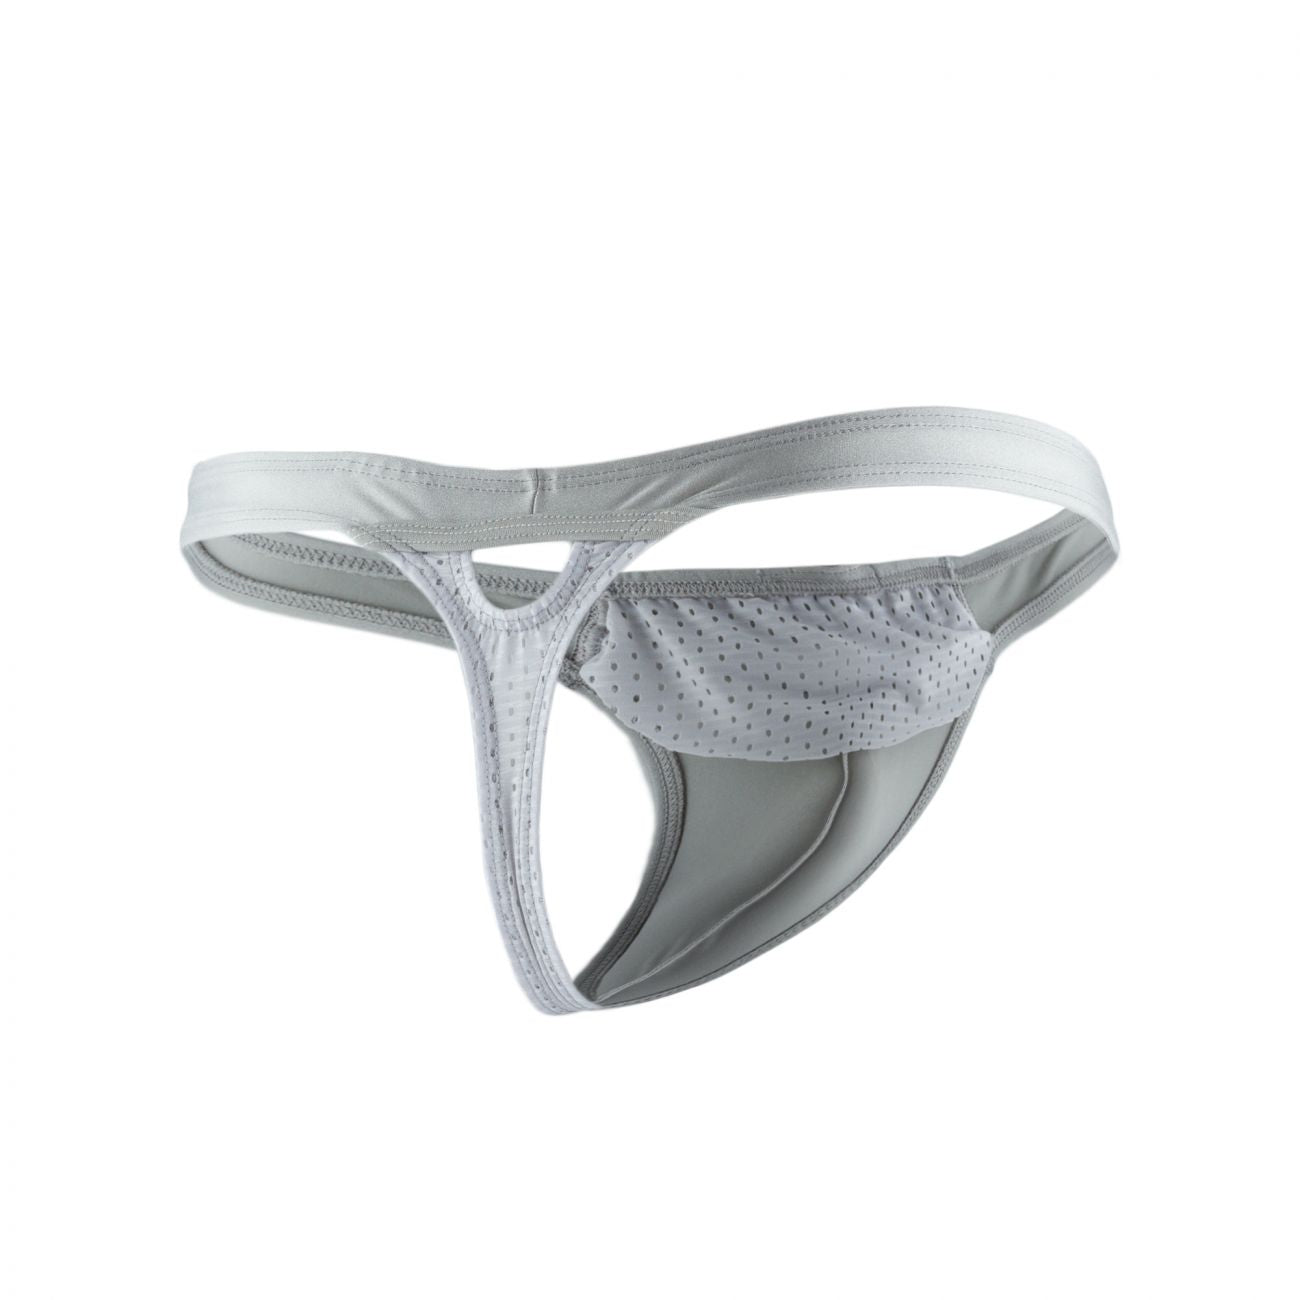 Joe Snyder JSXT02 Sexiest Thongs White and Gray